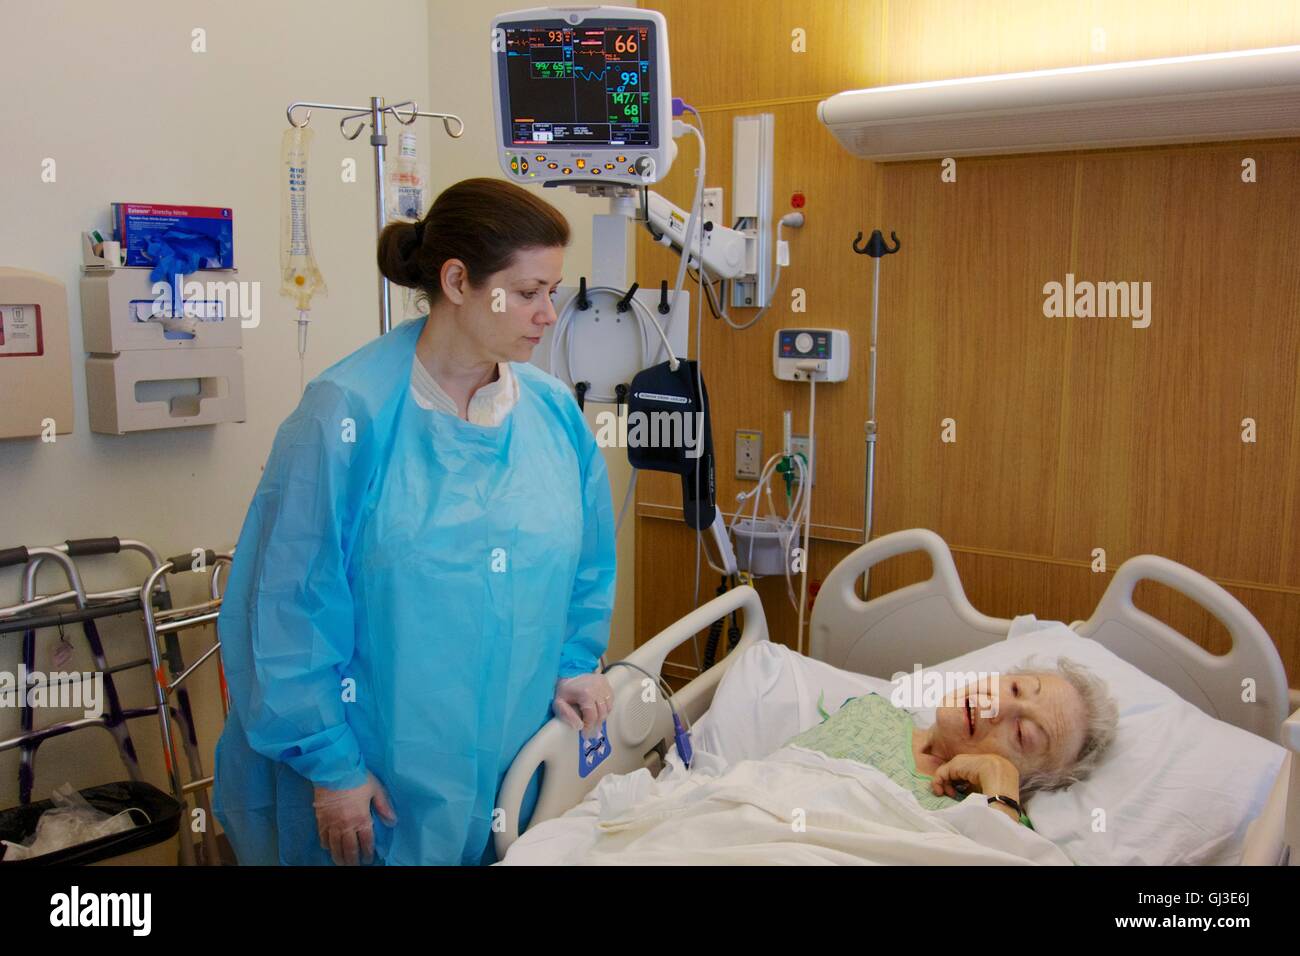 Woman visiting sick grandmother in hospital, wearing gown and gloves due to Clostridium difficile infection in older woman. Stock Photo